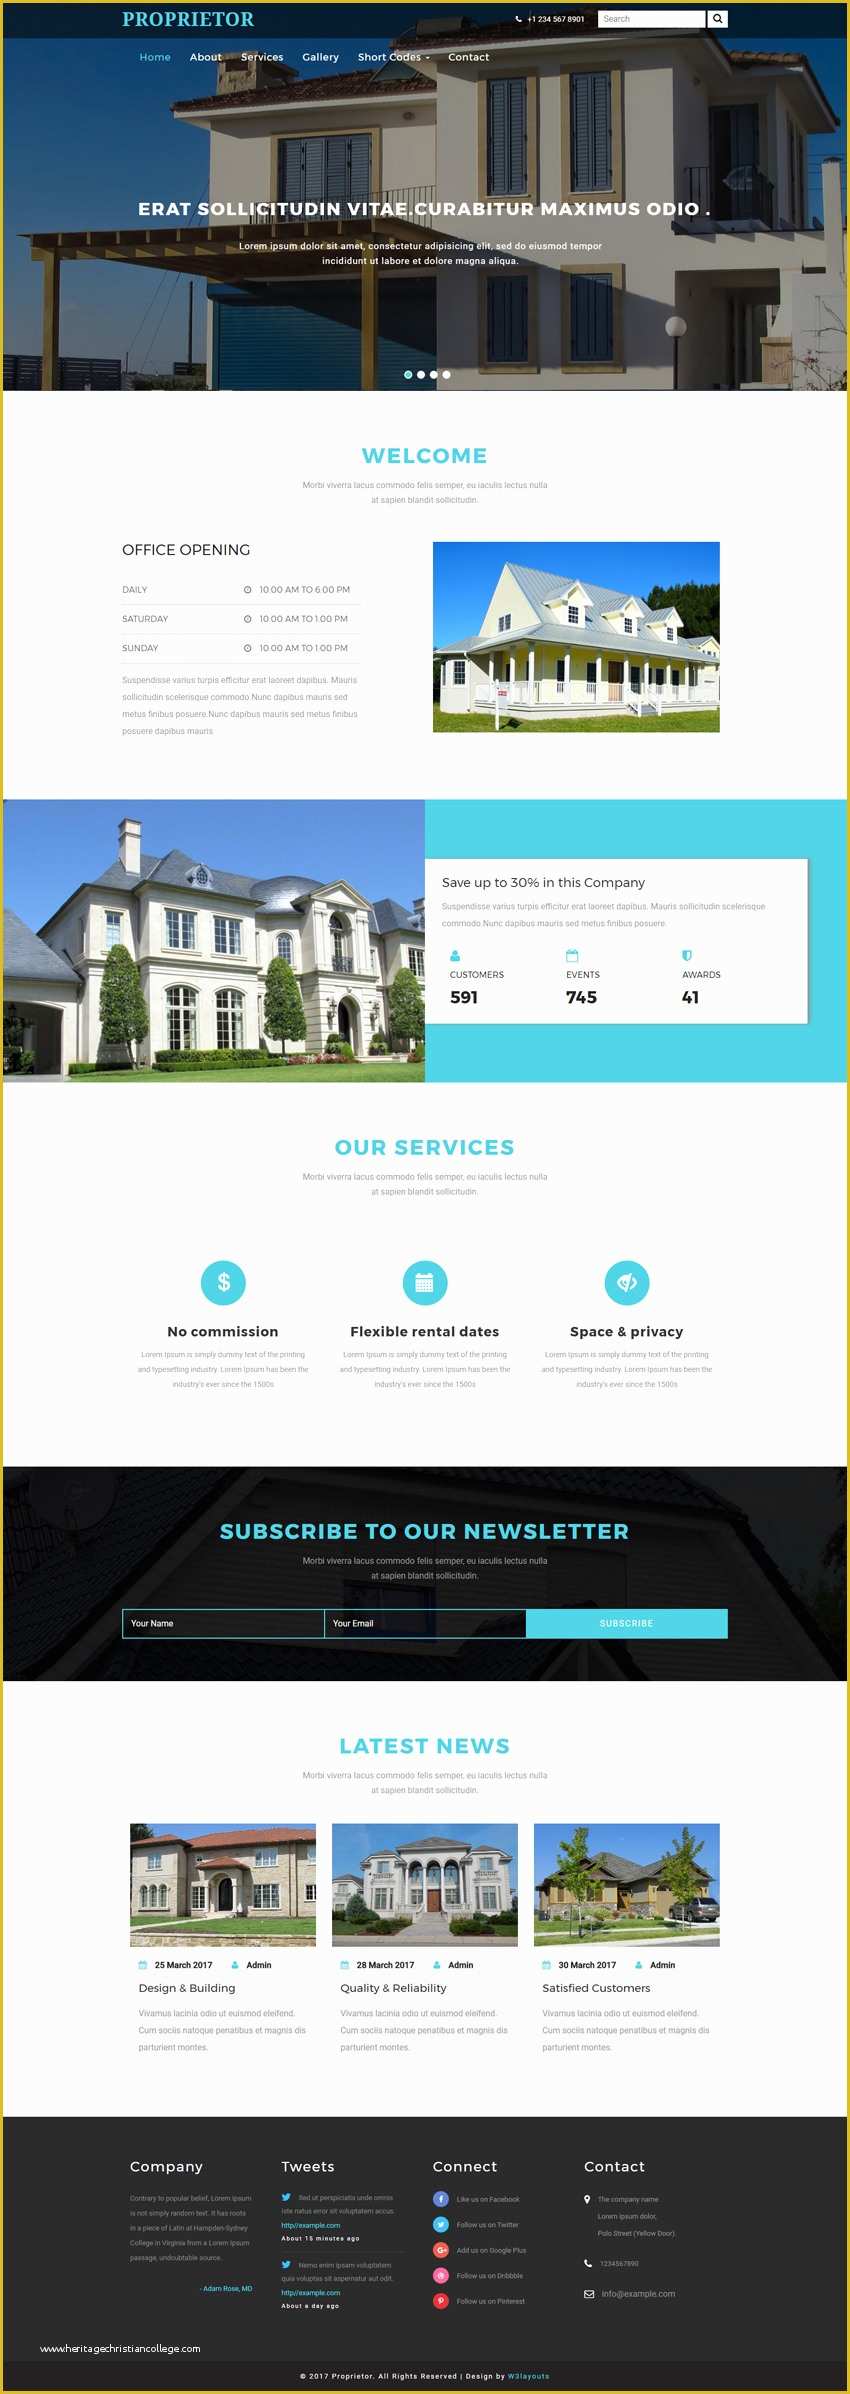 Free Real Estate Responsive Website Templates Of Proprietor A Real Estate Category Bootstrap Responsive Web